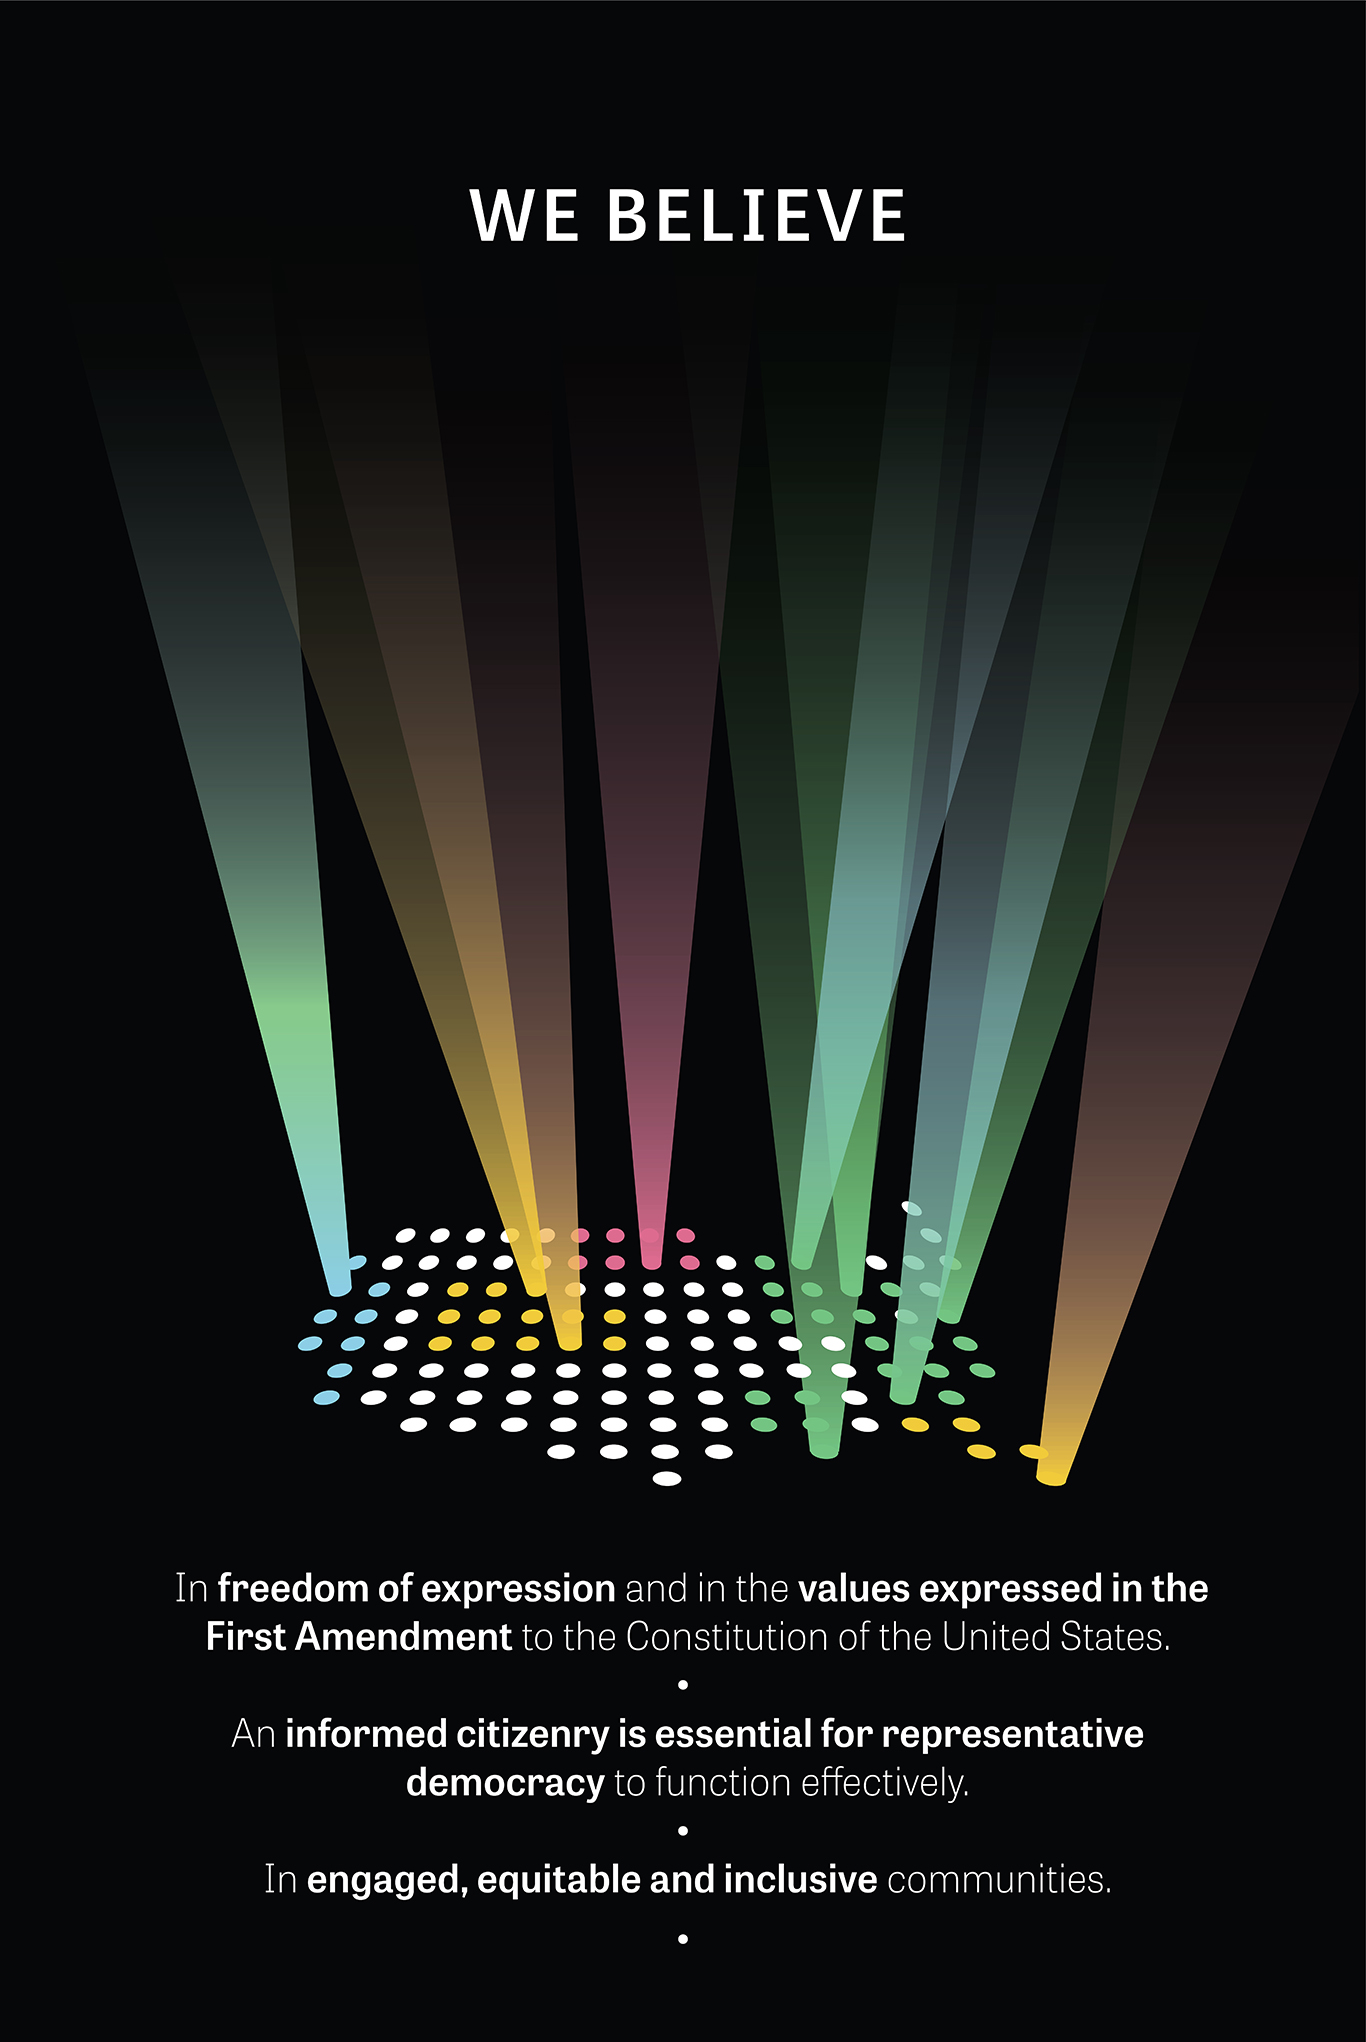 A black poster with an image of the United States made up of white, blue, pink, yellow, and green dots where some turn into colored spotlights with large white text that reads “We Believe” and small white text that reads “In freedom of expression and in the values expressed in the First Amendment to the Constitution of the United States. An informed citizenry is essential for representative democracy to function effectively. In engaged, equitable and inclusive communities.”.